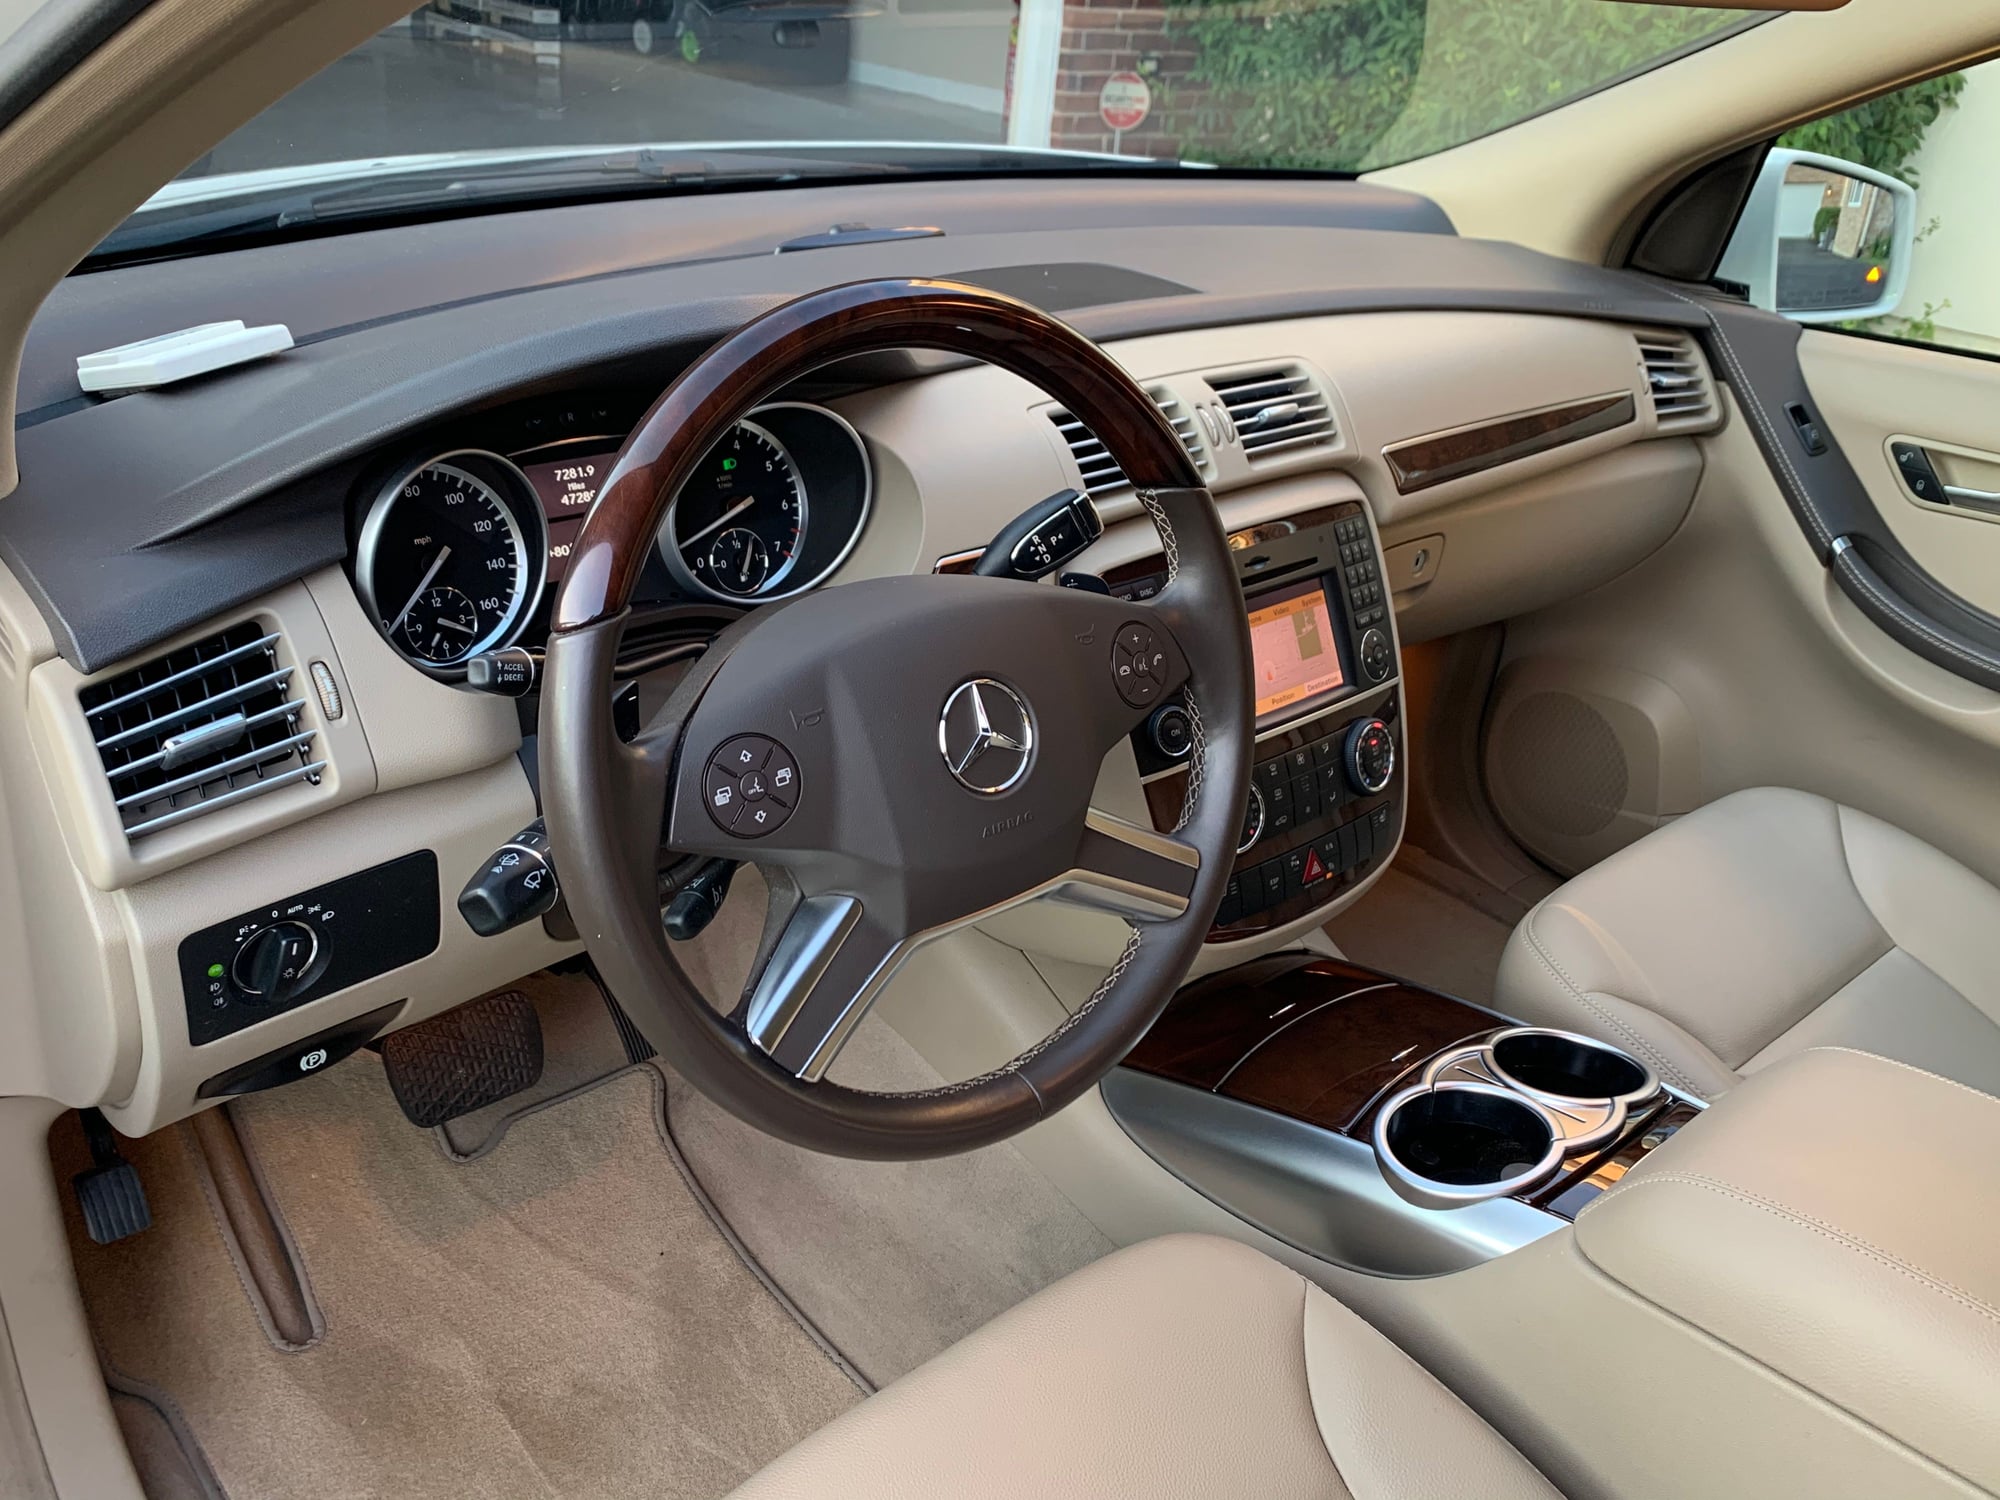 2011 Mercedes-Benz R350 - 2011 Mercedes R350 - Used - VIN 4jgcb6fe4ba115917 - 47,600 Miles - 6 cyl - AWD - Automatic - Van - White - Libertyville, IL 60048, United States